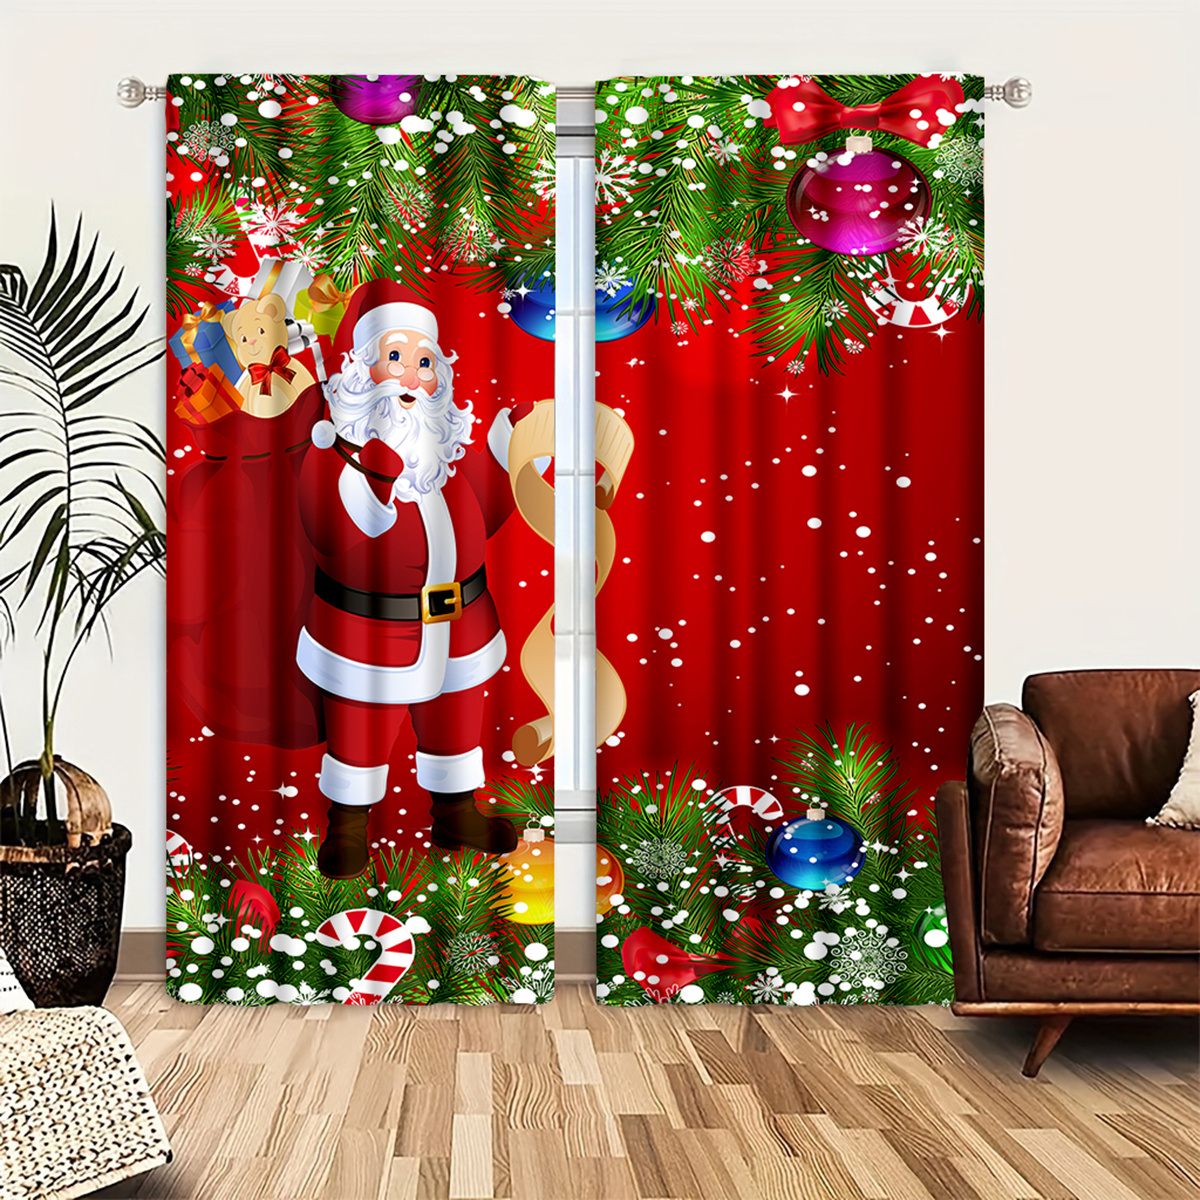 

Christmas Santa Claus Door Curtains Set Of 2, Art Deco Washable Polyester Panels With Tie Back, Festive Red Bedroom Doorway Drapes, Unlined Satin Weave Landscape And Flowers Design For Holiday Decor